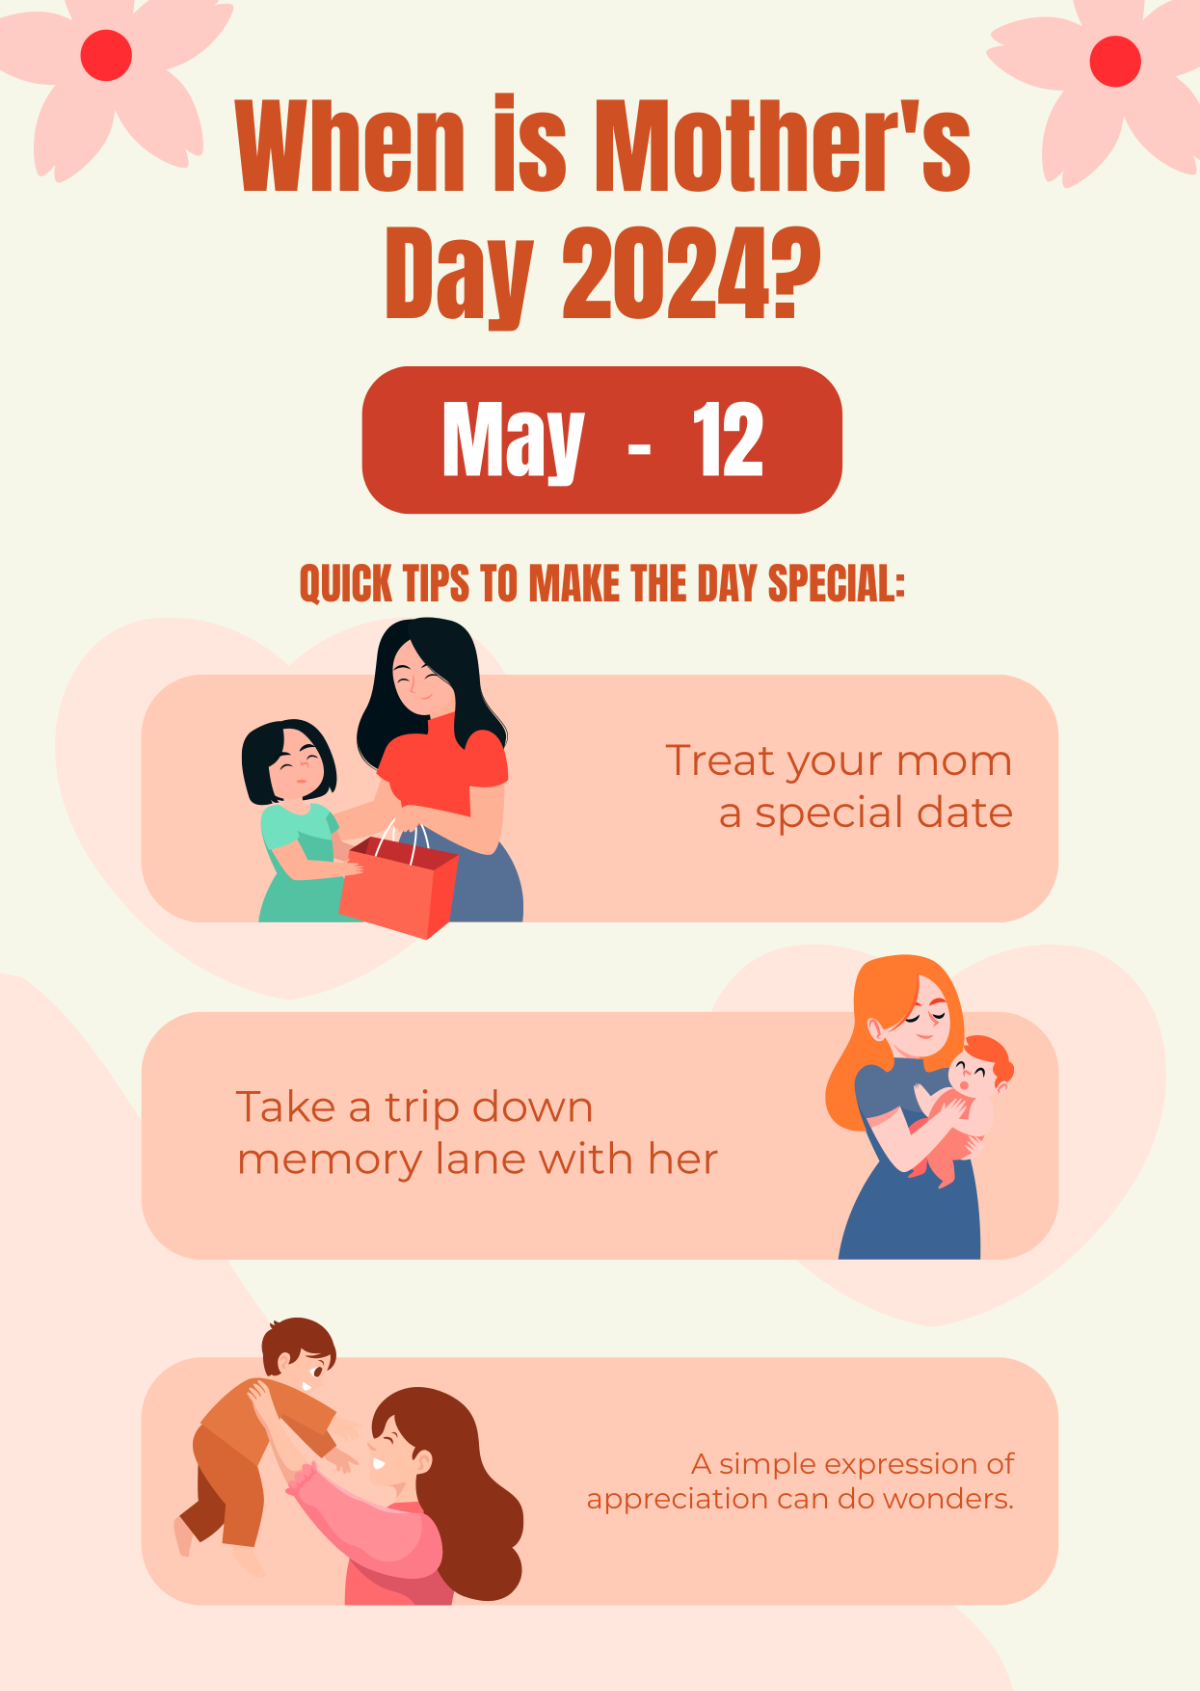 When is Mother's day 2024?